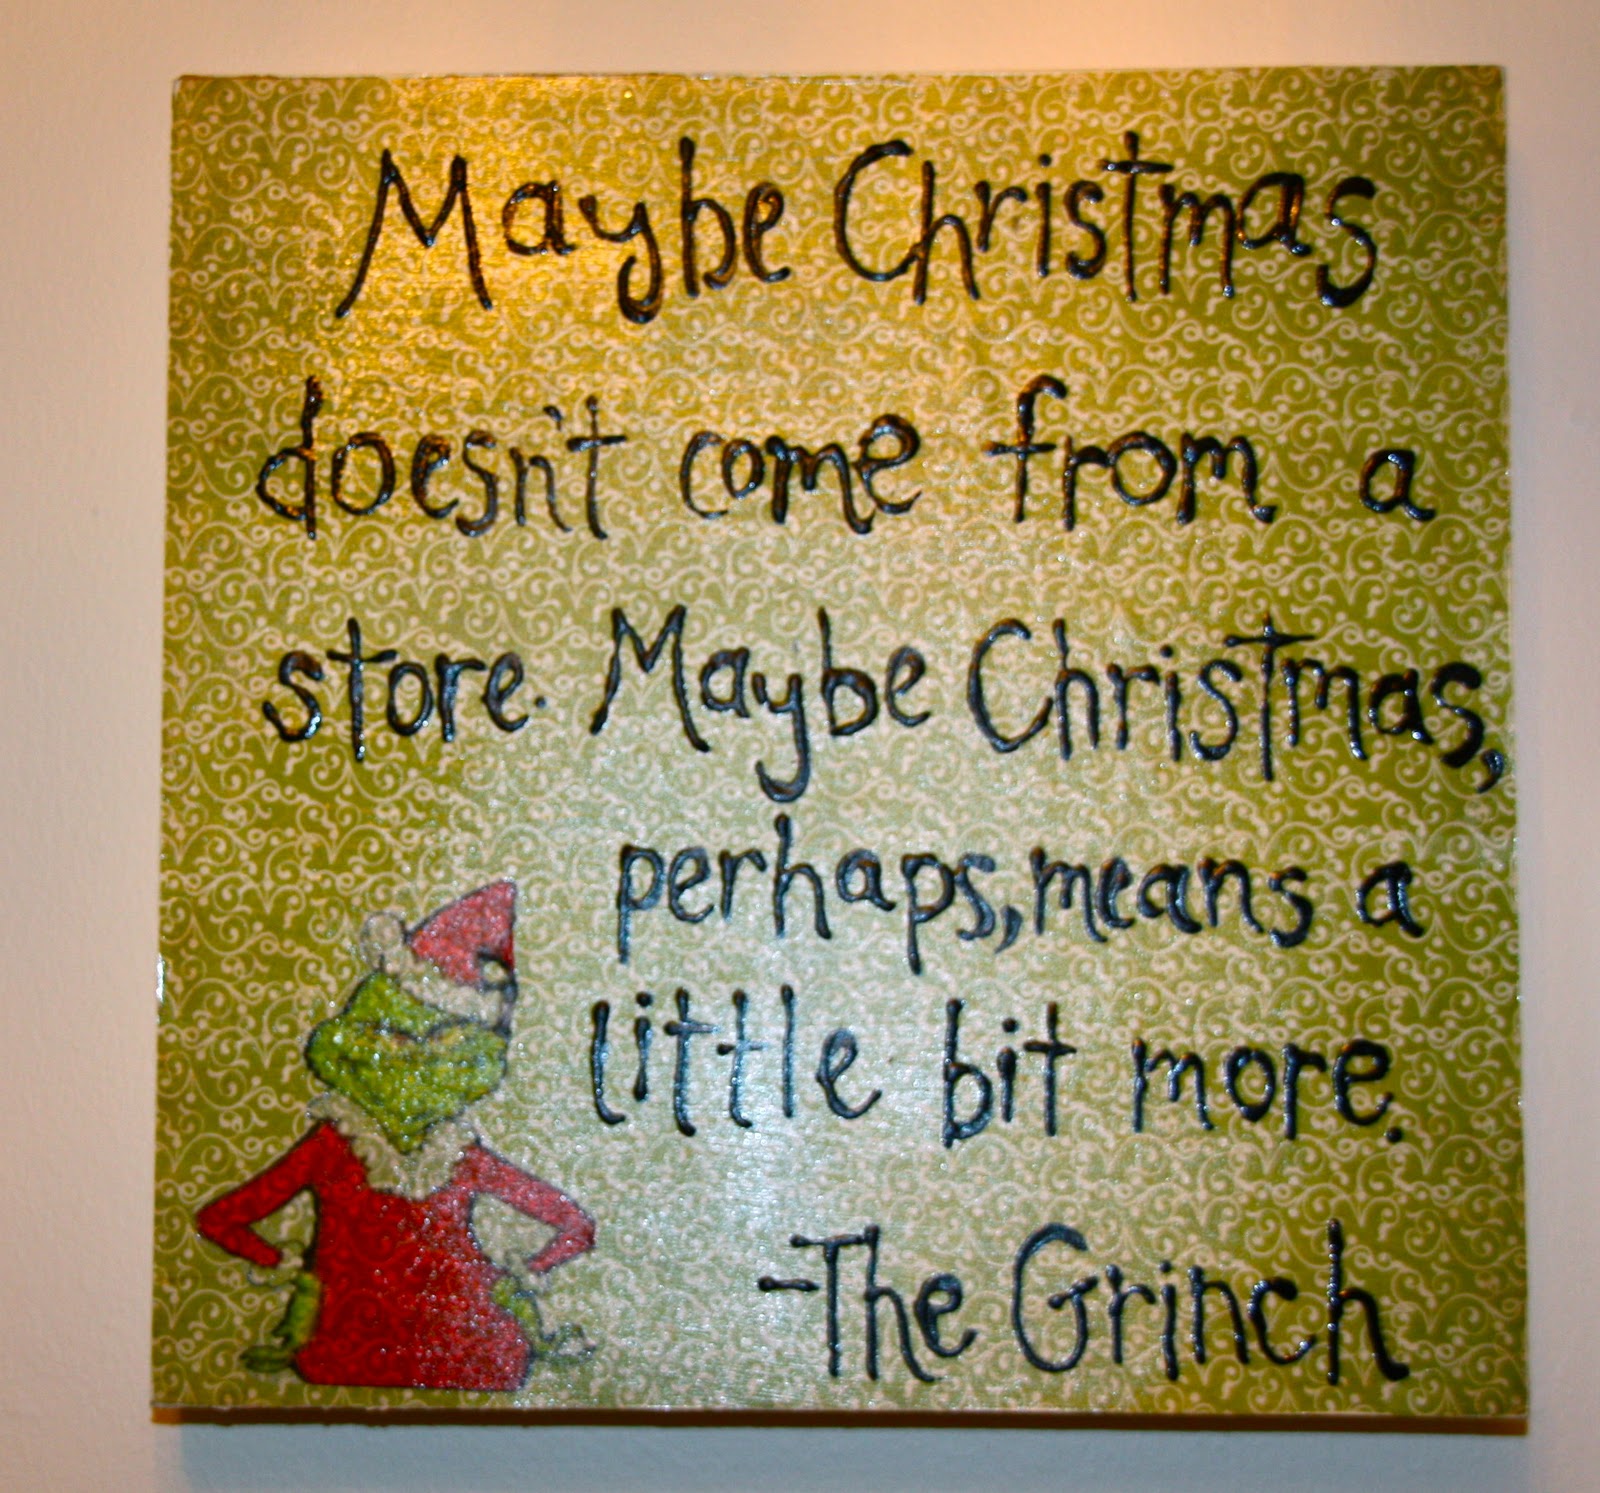 Christmas Grinch Quotes Maybe. QuotesGram